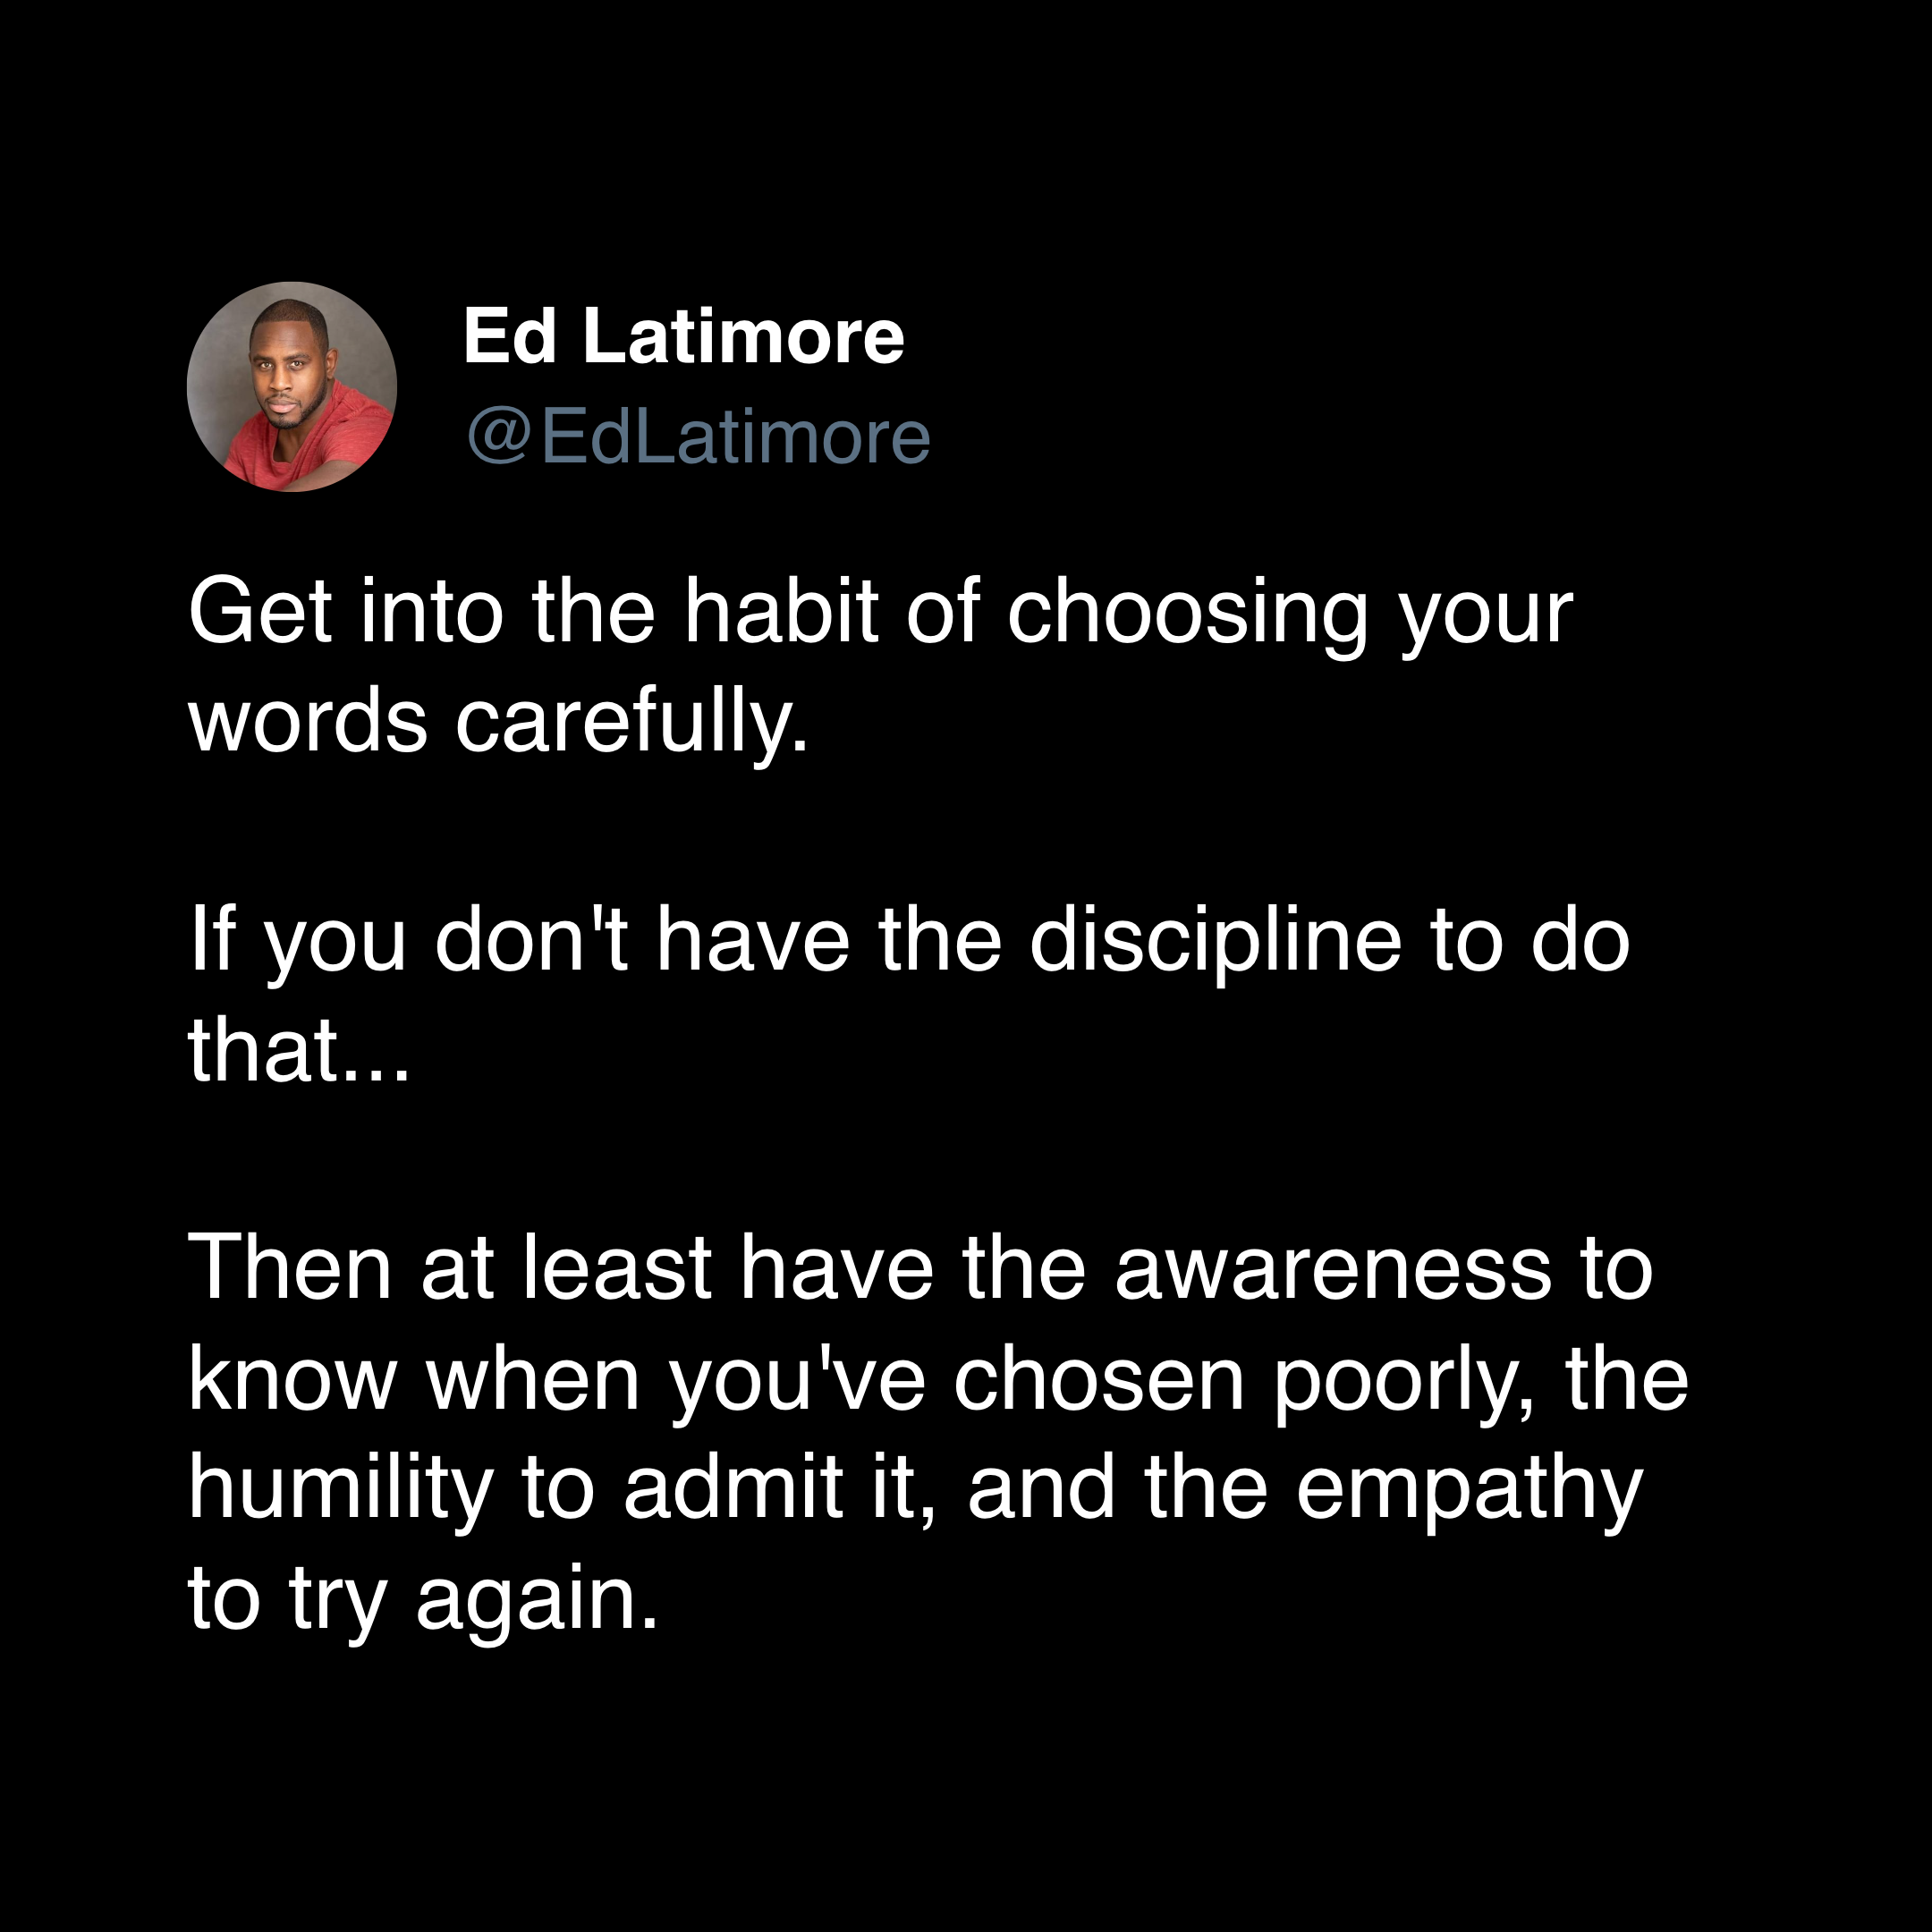 ed latimore discipline quote "get into the habit of choosing your words wisely"